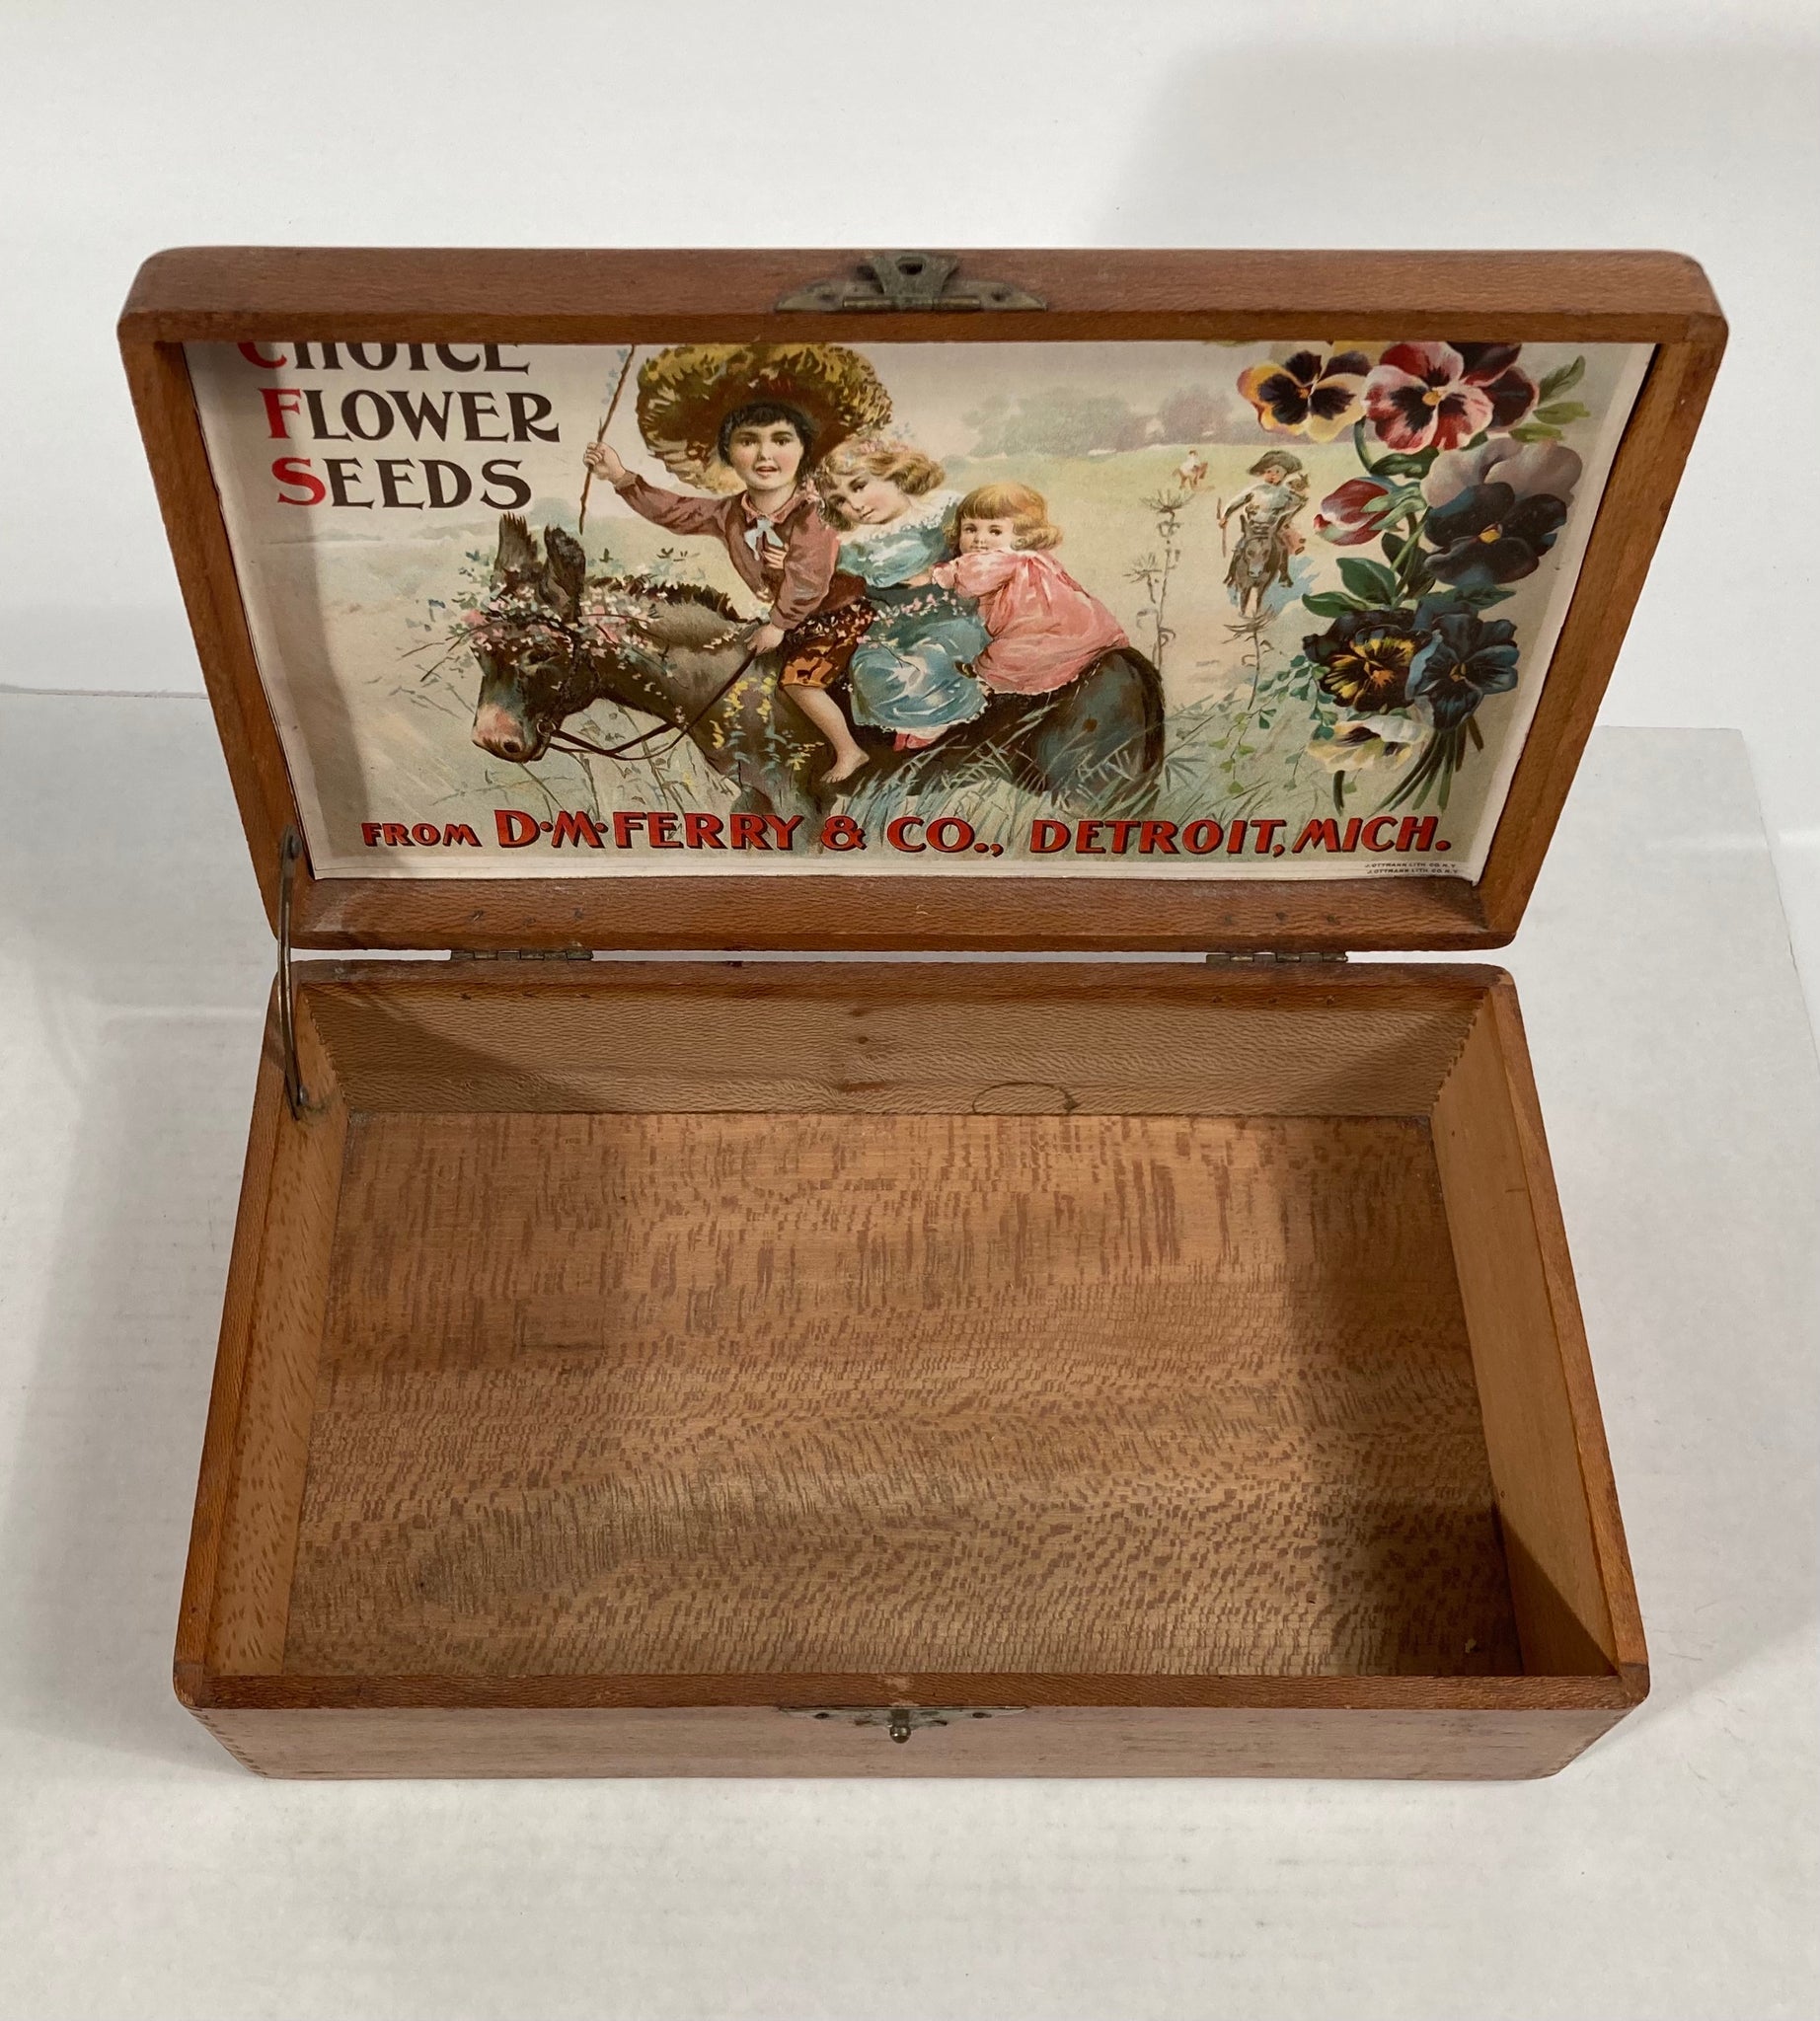 Choice FLOWER SEEDS, Old Vintage SEED BOX, D.M Ferry, Detroit